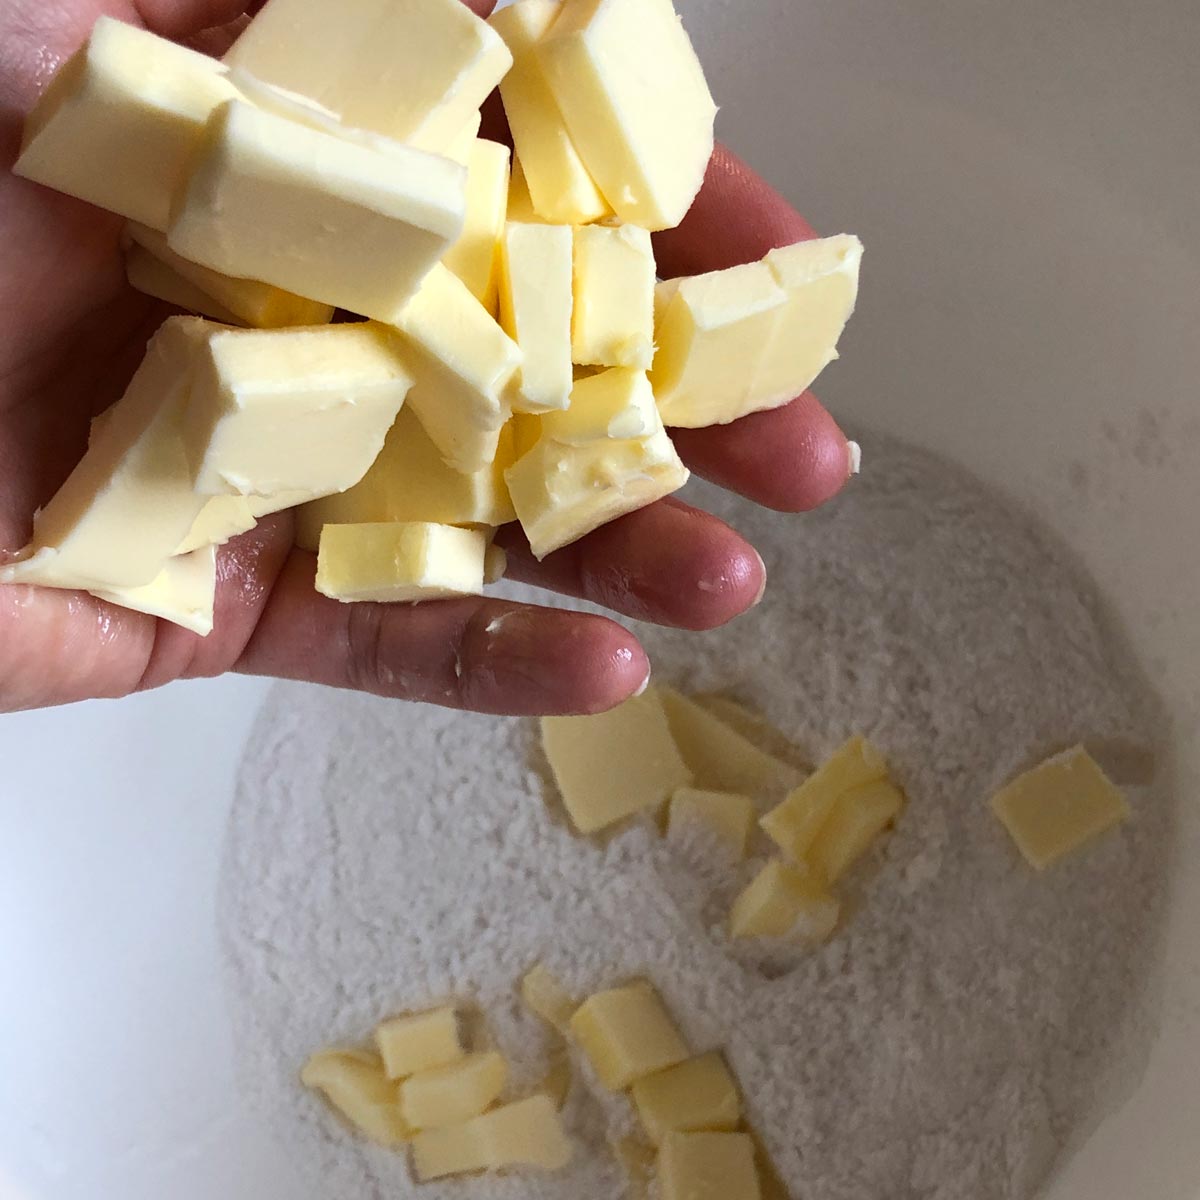 A hand carring cubbed butter into a bowl.